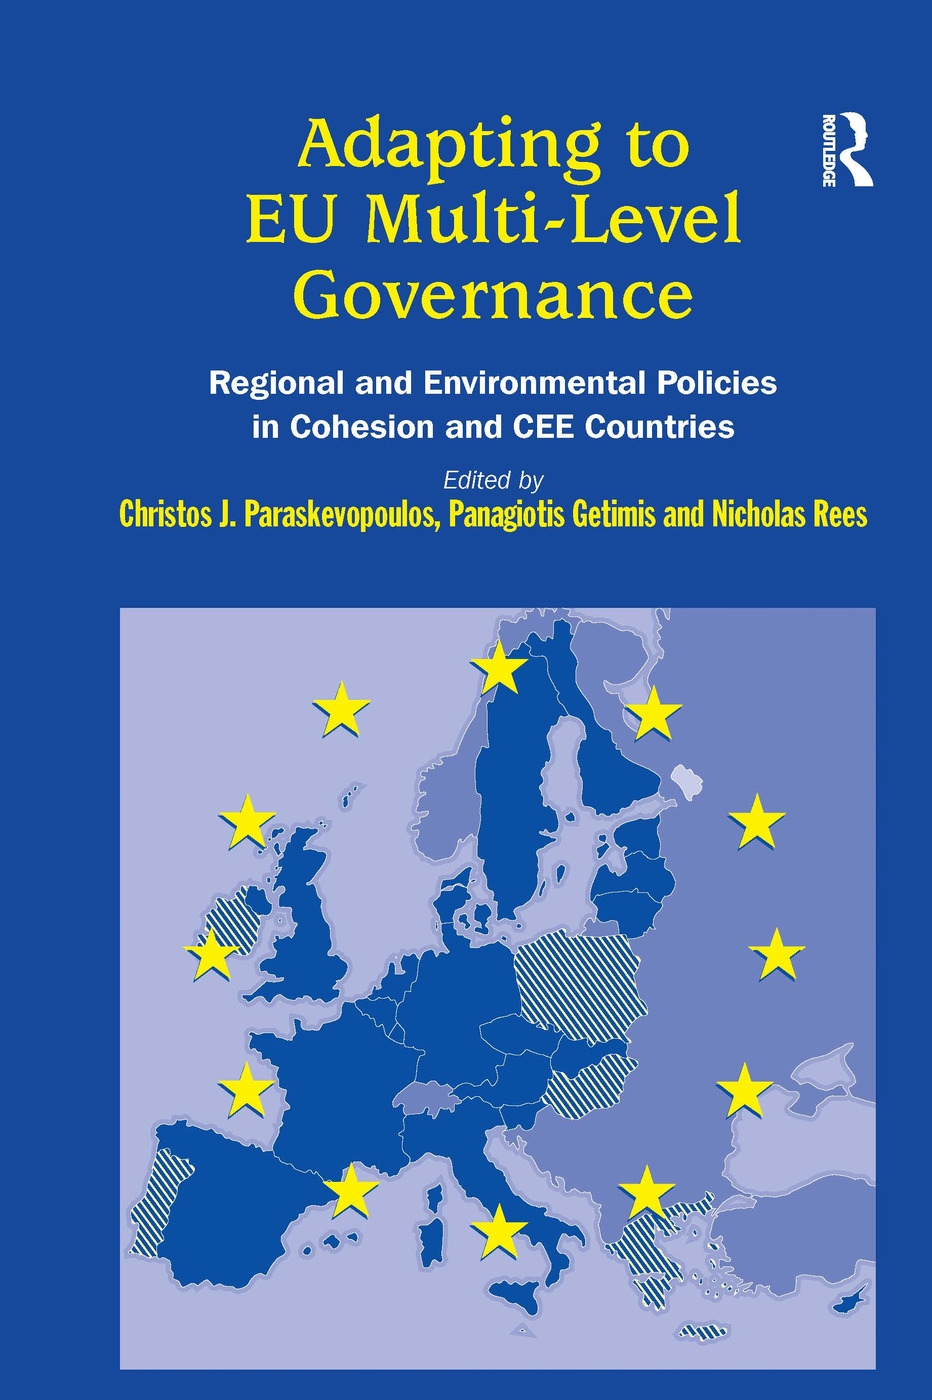 Adapting to Eu Multi-level Governance: Regional and Environmental Policies in Cohesion and Cee Countries